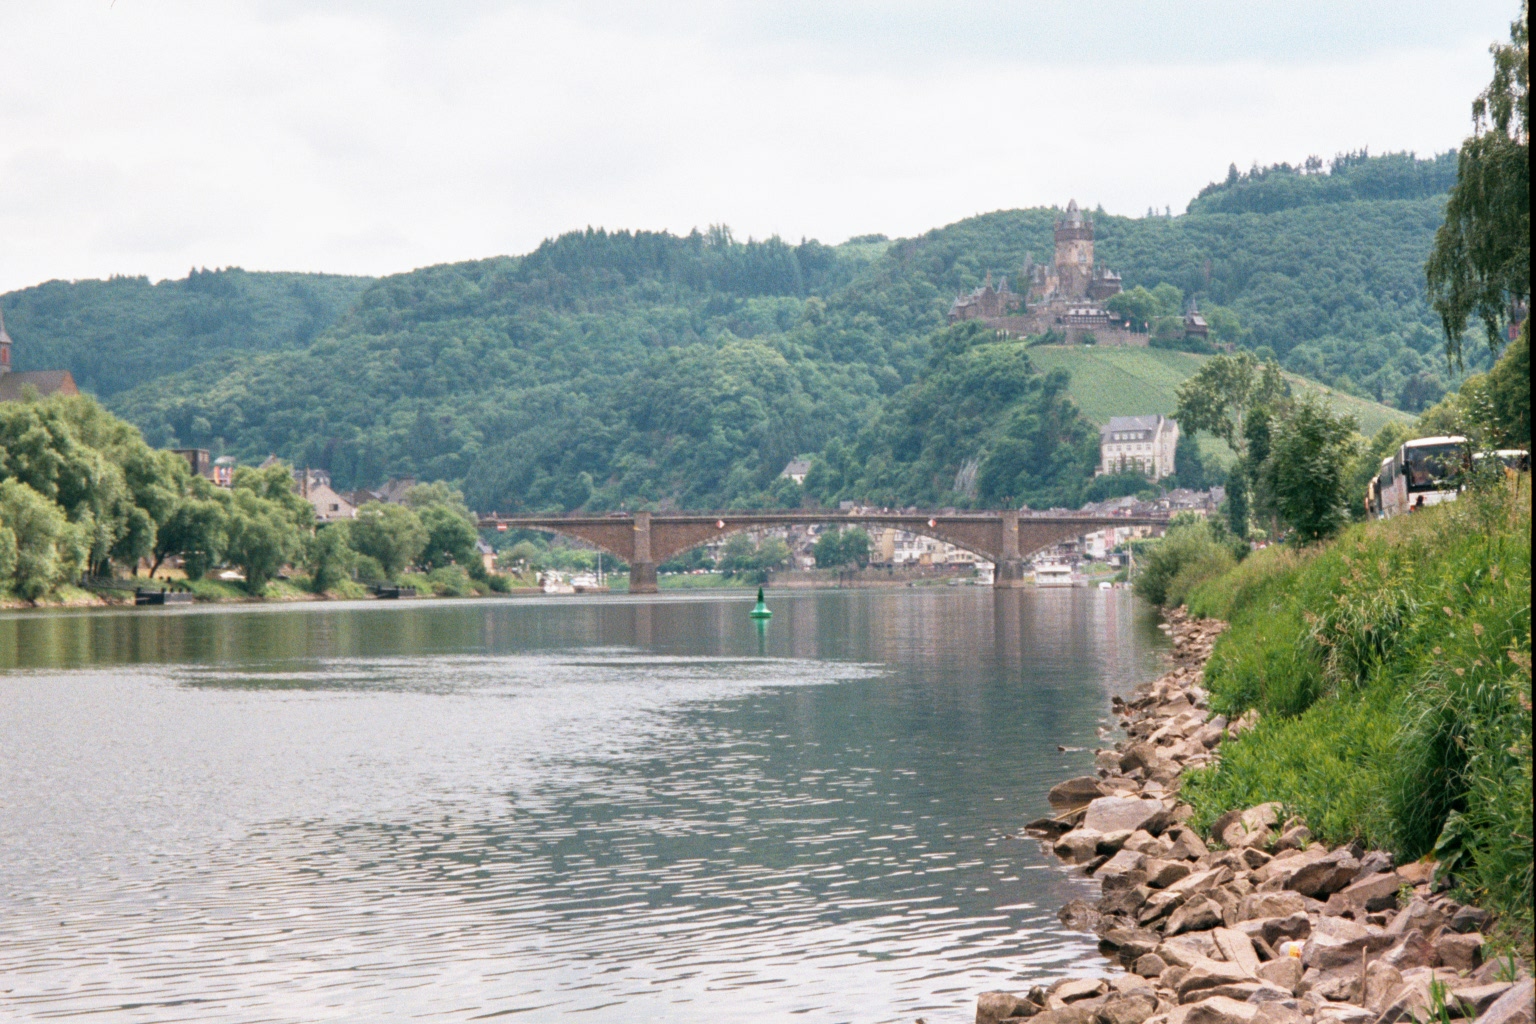 Along the Mosel river is the city and castle of Cochem